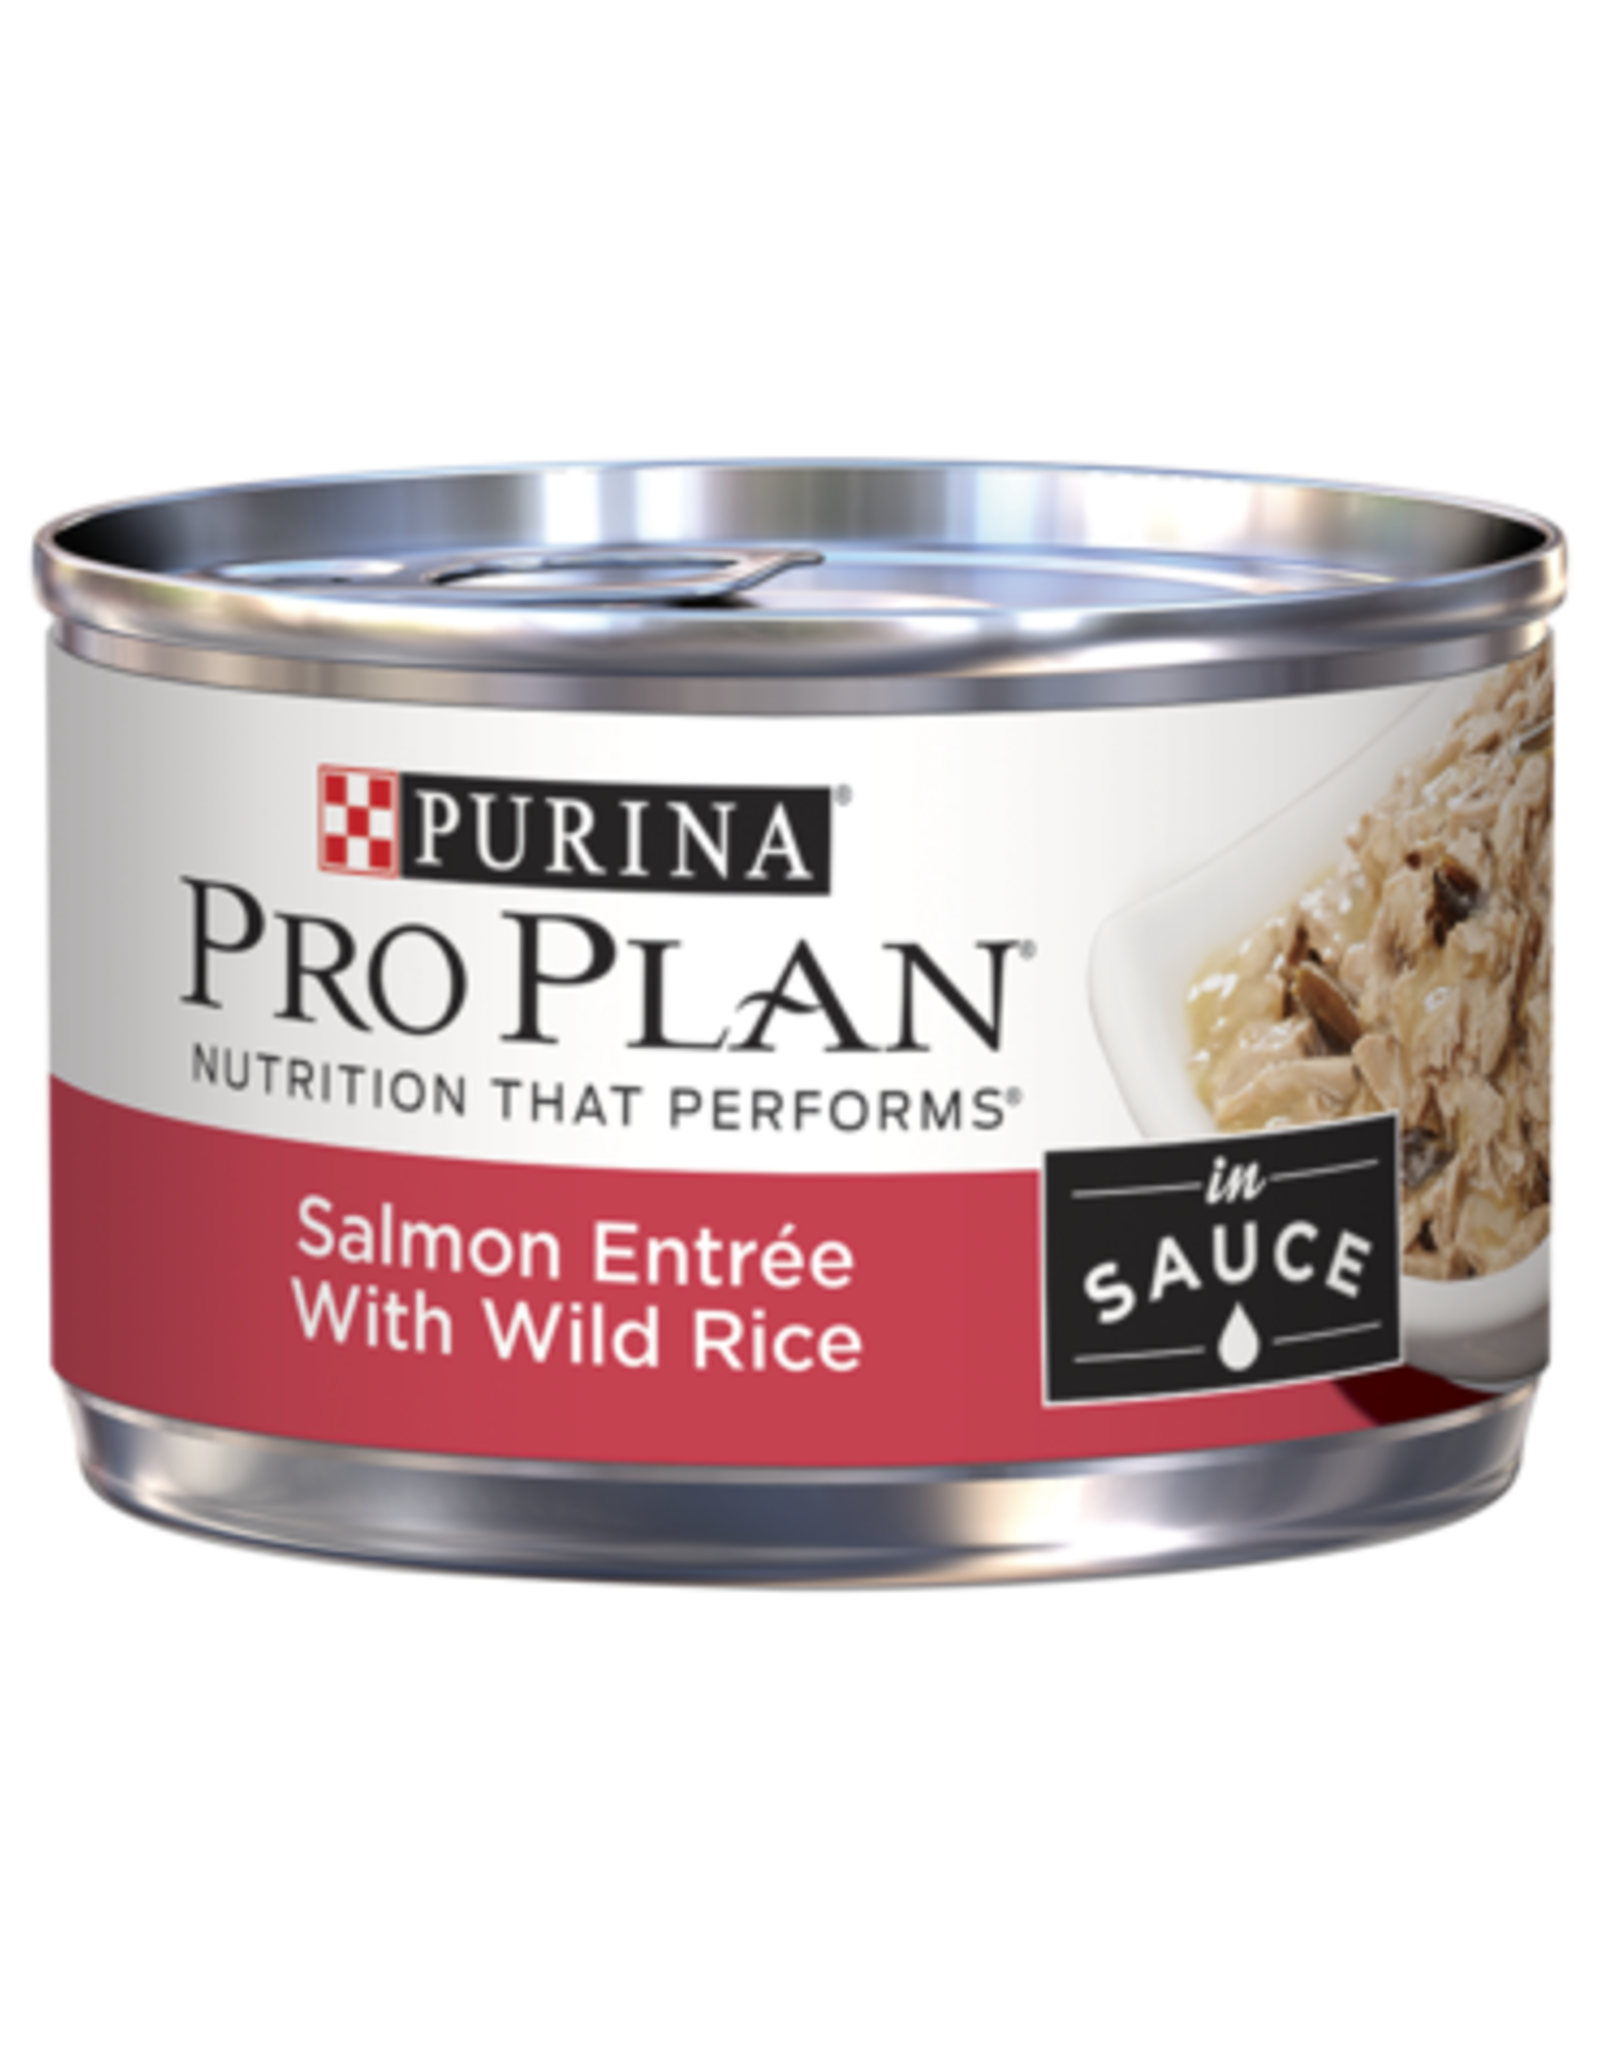 NESTLE PURINA PETCARE PRO PLAN CAT CAN SALMON & RICE ENTREE 3OZ CASE OF 24